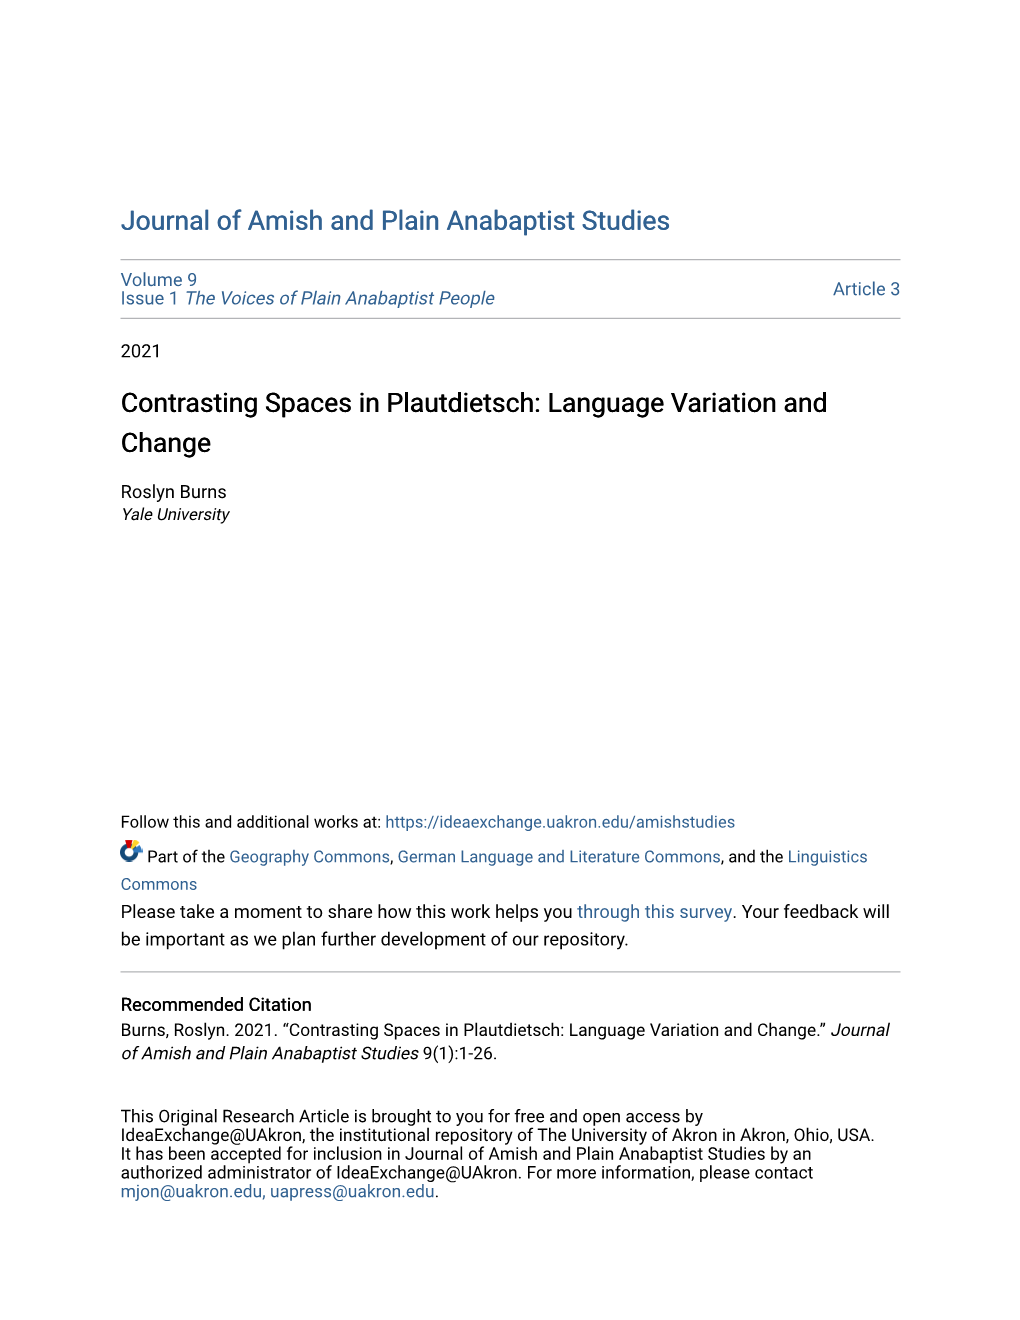 Contrasting Spaces in Plautdietsch: Language Variation and Change